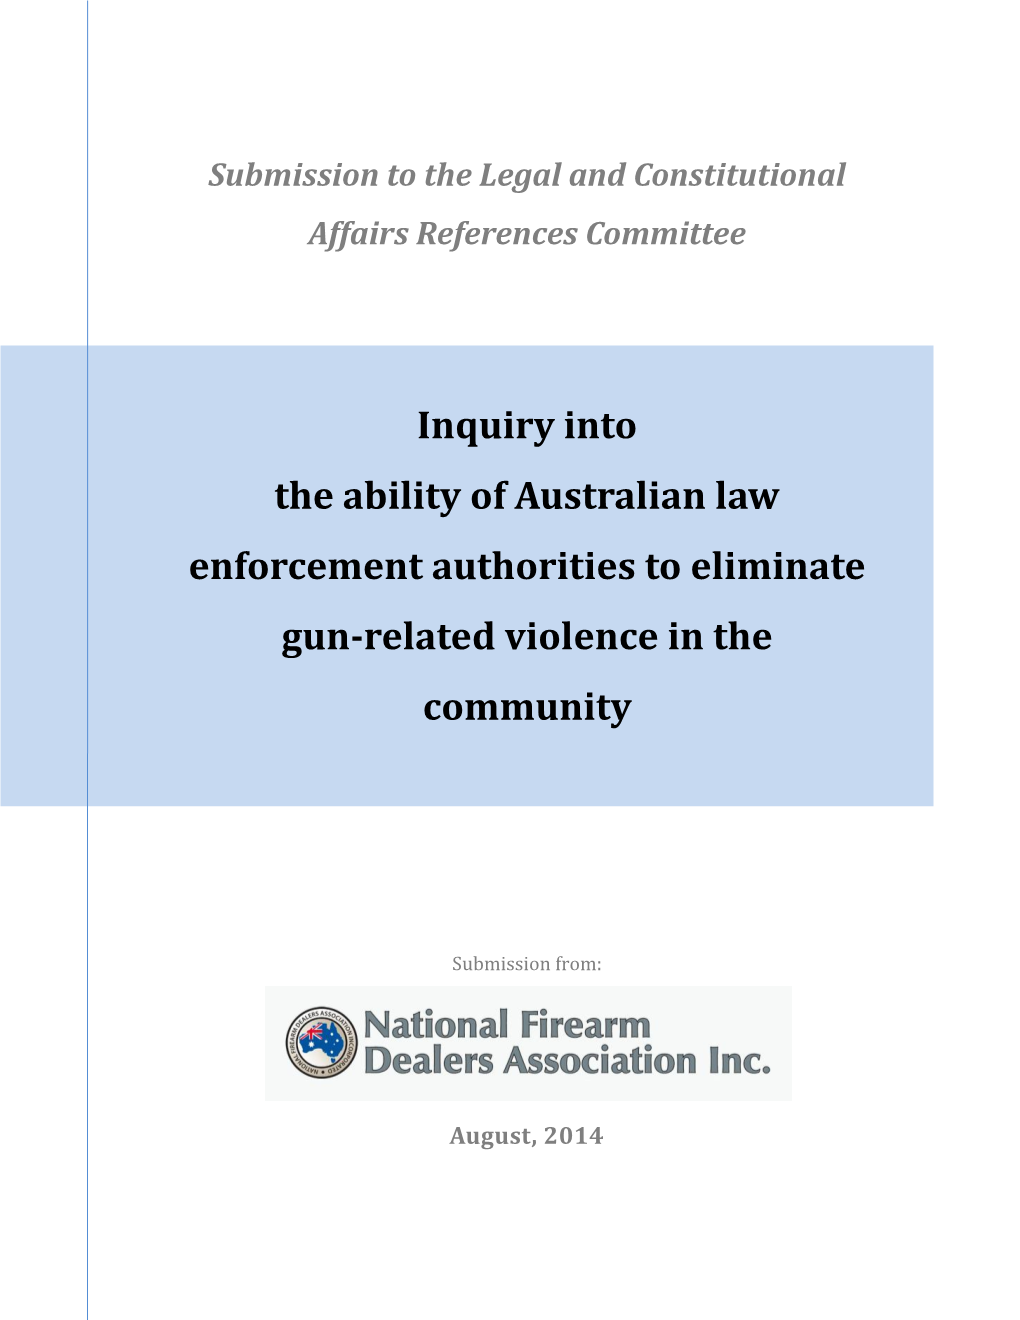 Inquiry Into the Ability of Australian Law Enforcement Authorities to Eliminate Gun-Related Violence in the Community